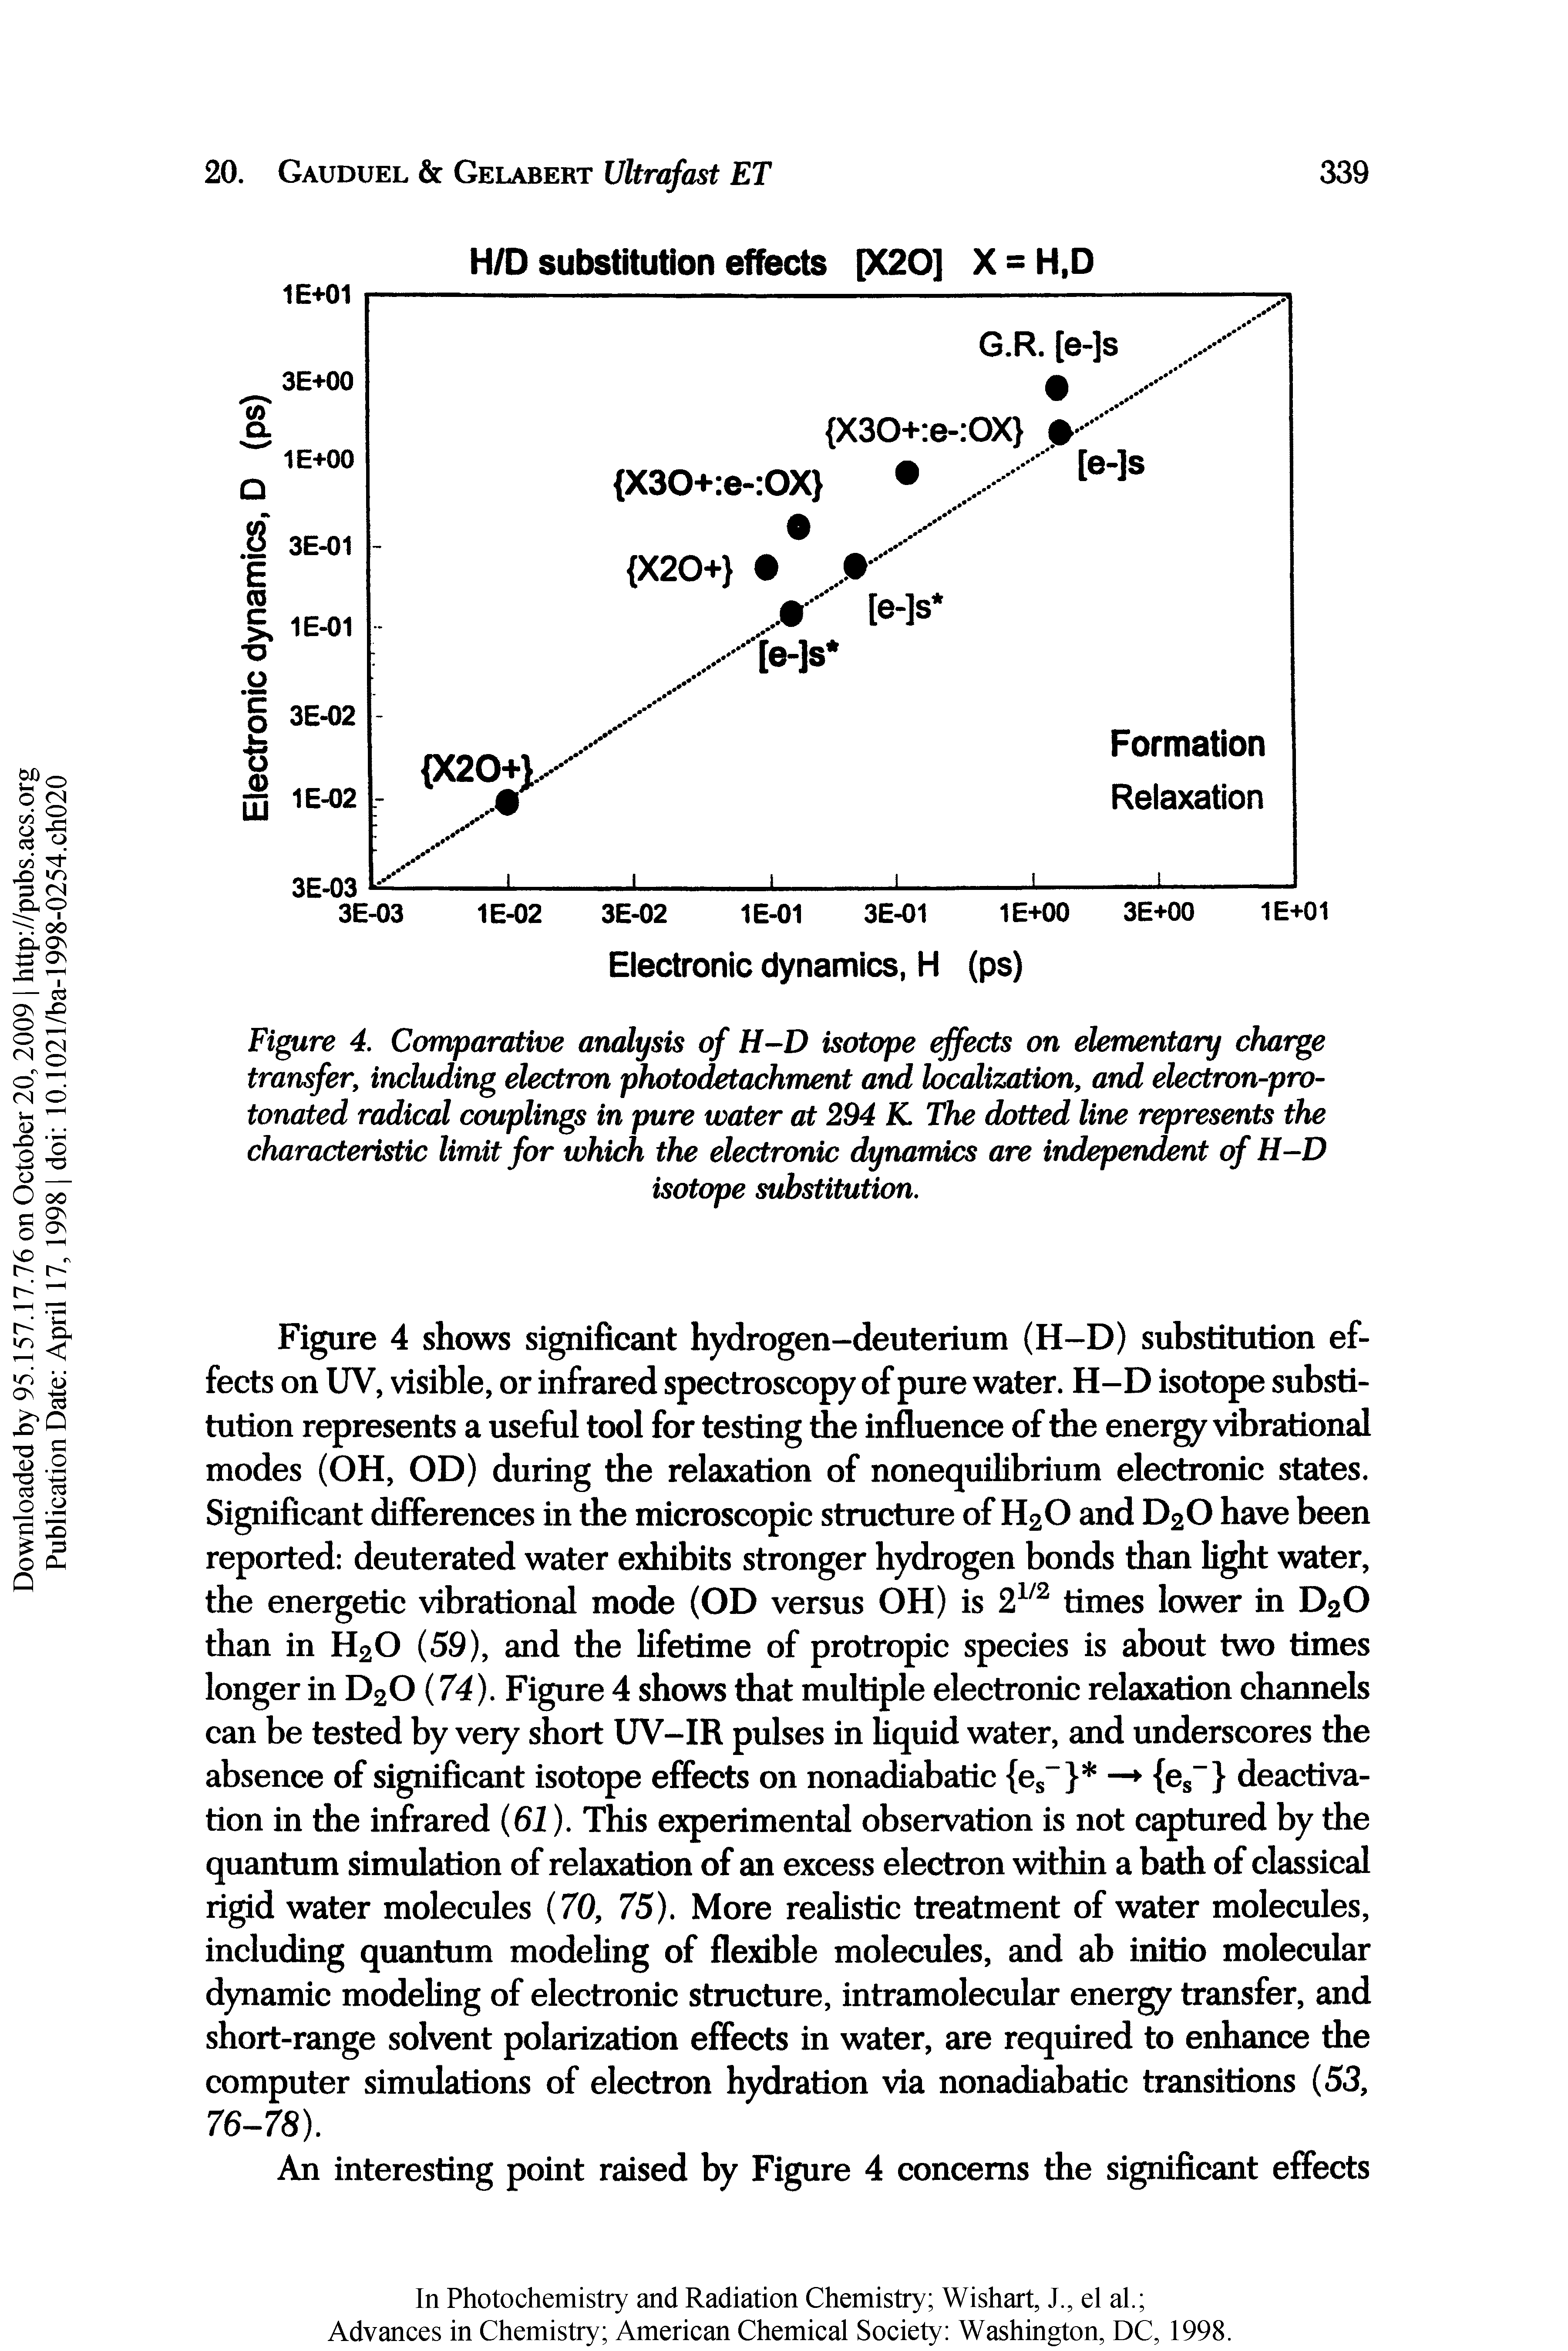 Figure 4. Comparative analysis of H-D isotope effects on elementary charge transfer, including electron photodetachment and localization, and electron-pro-tonated radical couplings in pure water at 294 K The dotted line represents the characteristic limit for which the electronic dynamics are independent of H-D...